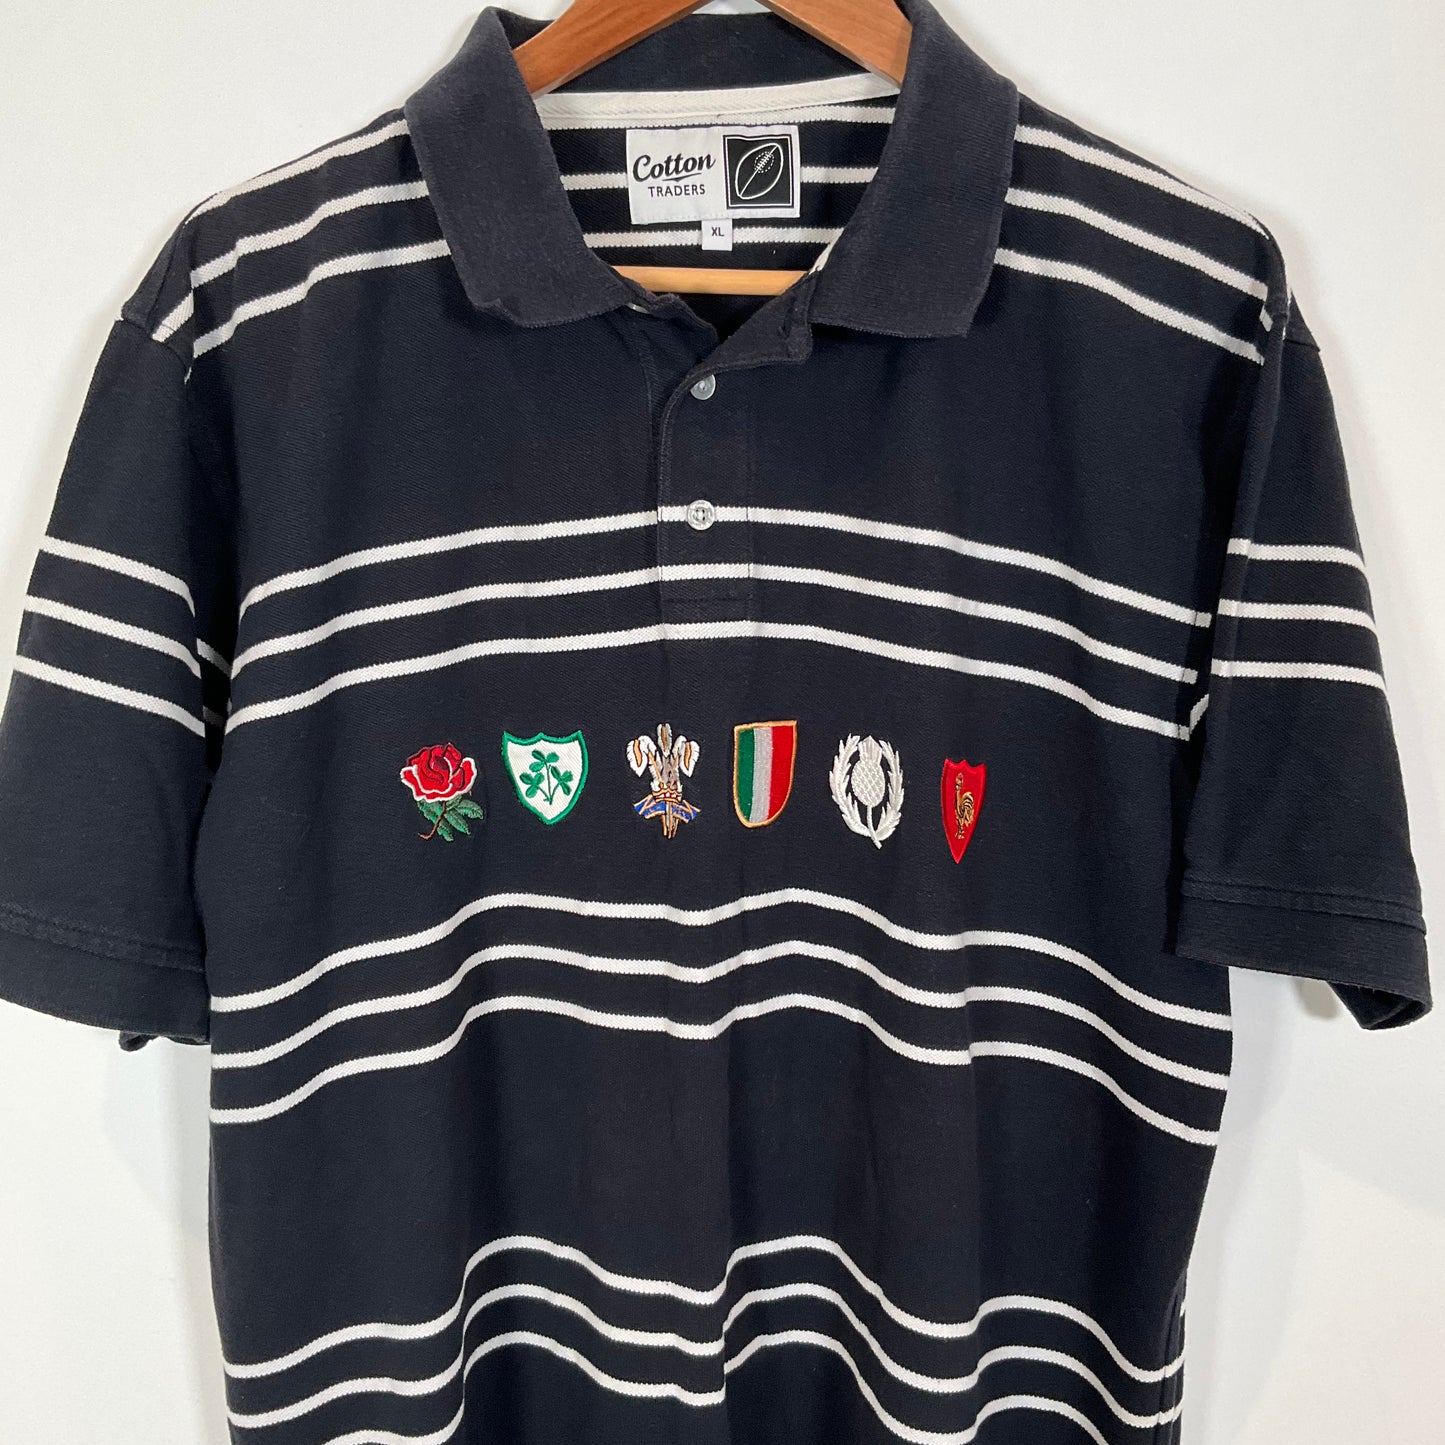 Cotton Traders - Rugby Shirt